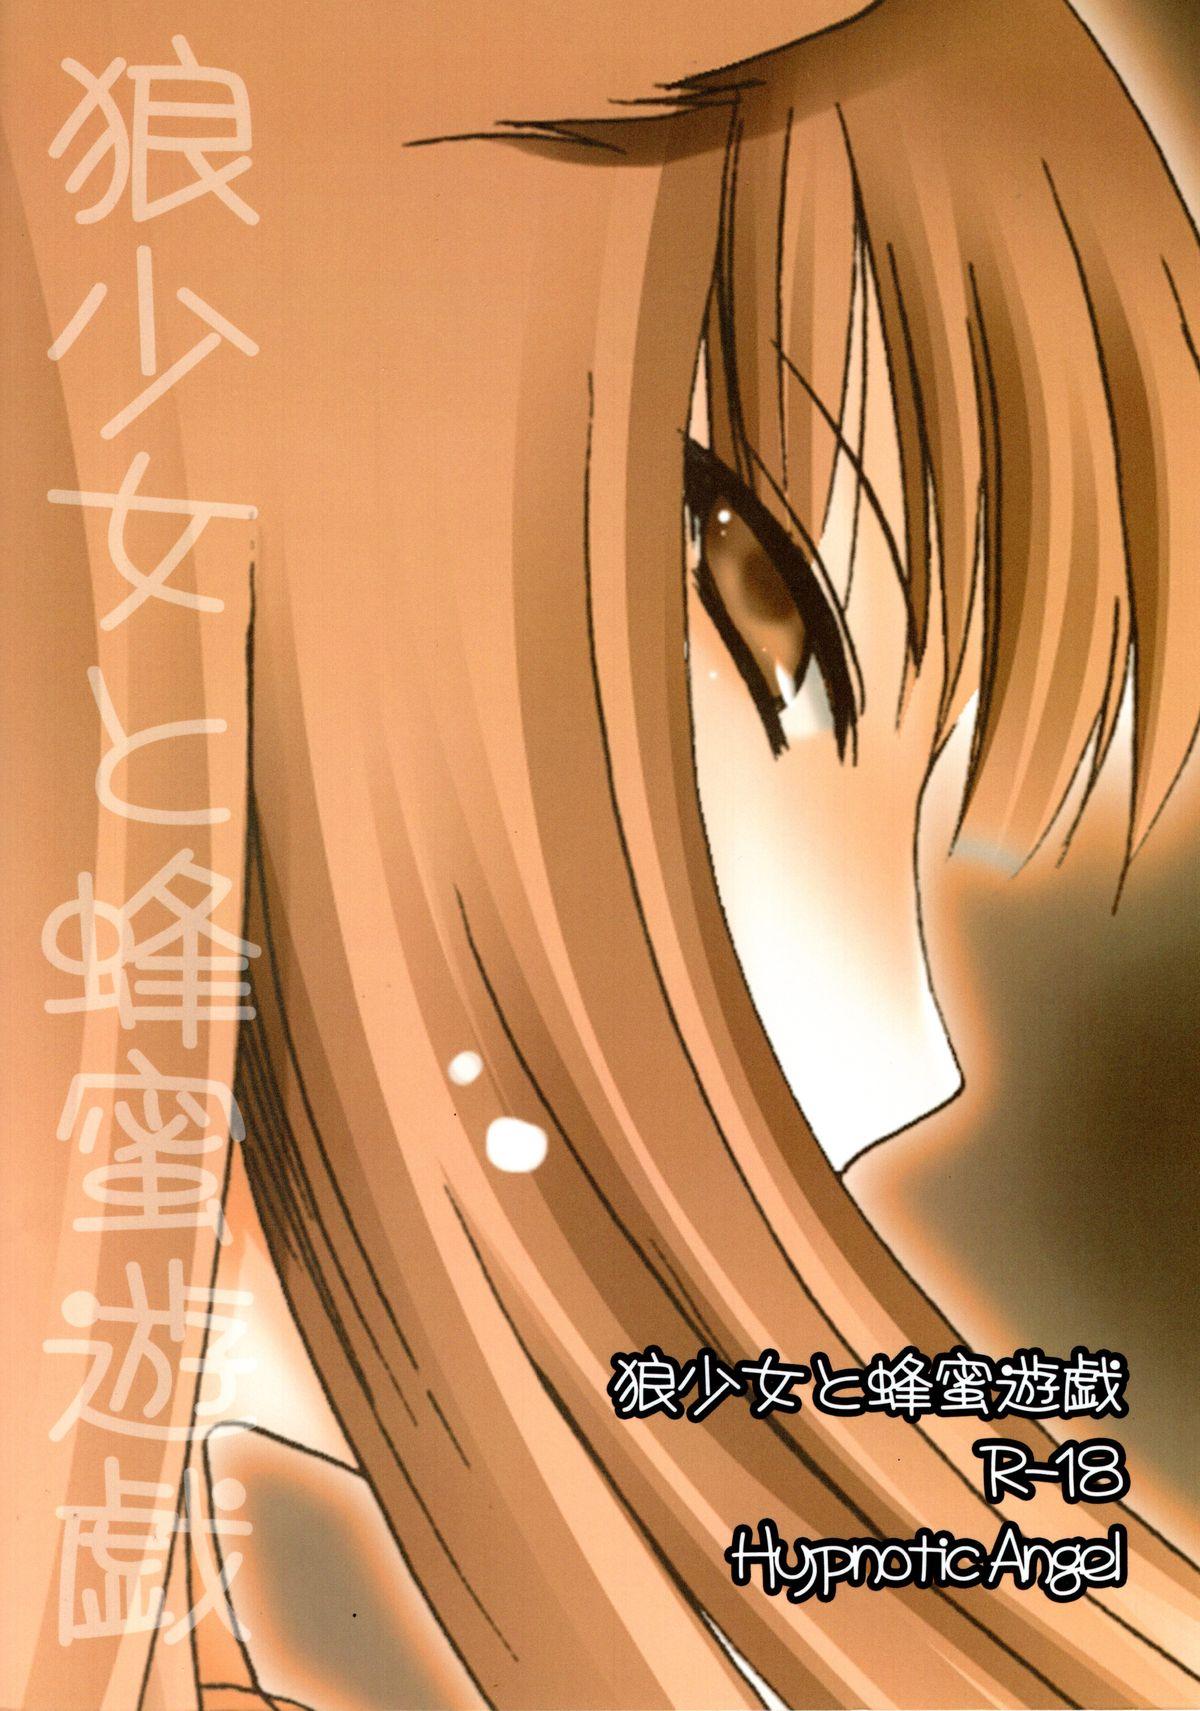 Soapy Massage Ookami Shoujo to Hachimitsu Yuugi - Spice and wolf Amateurporn - Page 2